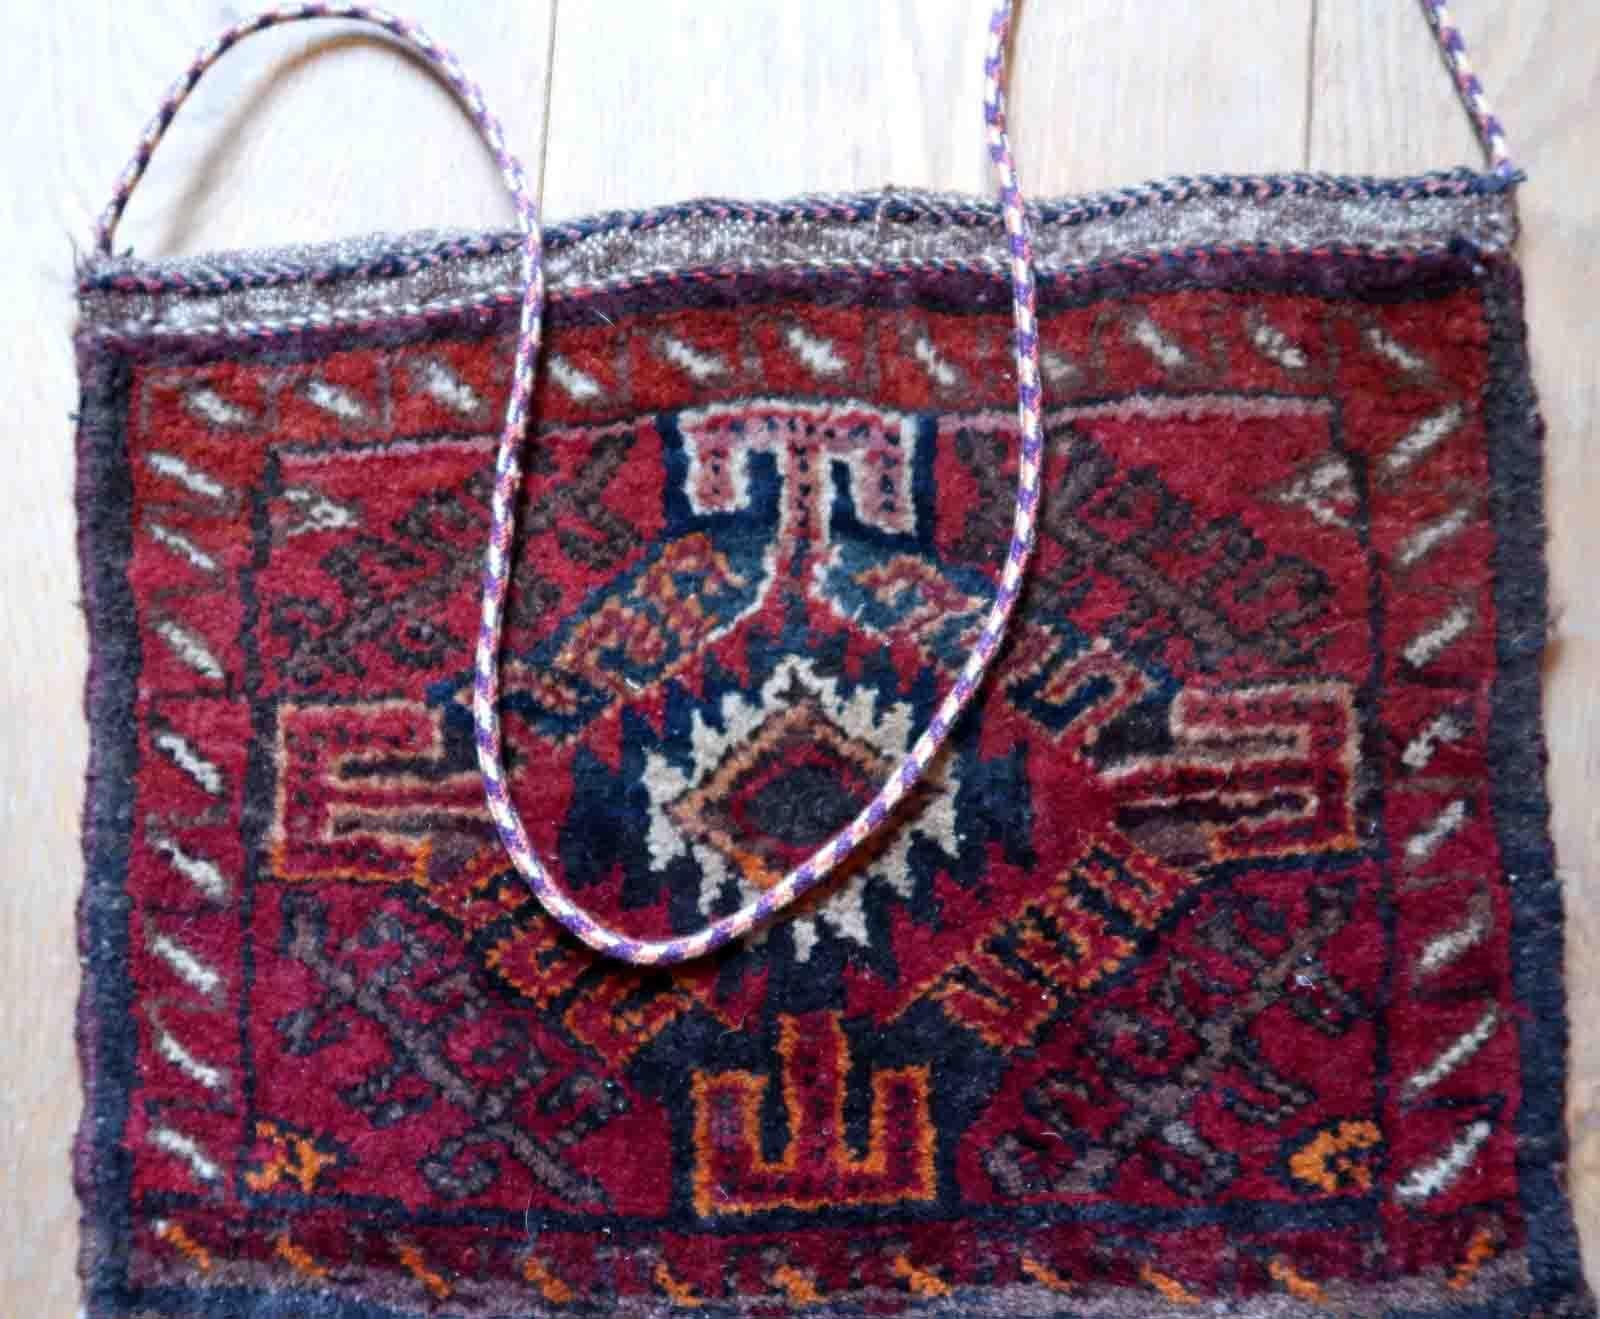 Handmade vintage Uzbek Salt bag in red color and large medallion. The bag is from the end of 20th century in original good condition. The handle has been attached to it, it can be removed or used as a regular handbag.

-condition: original